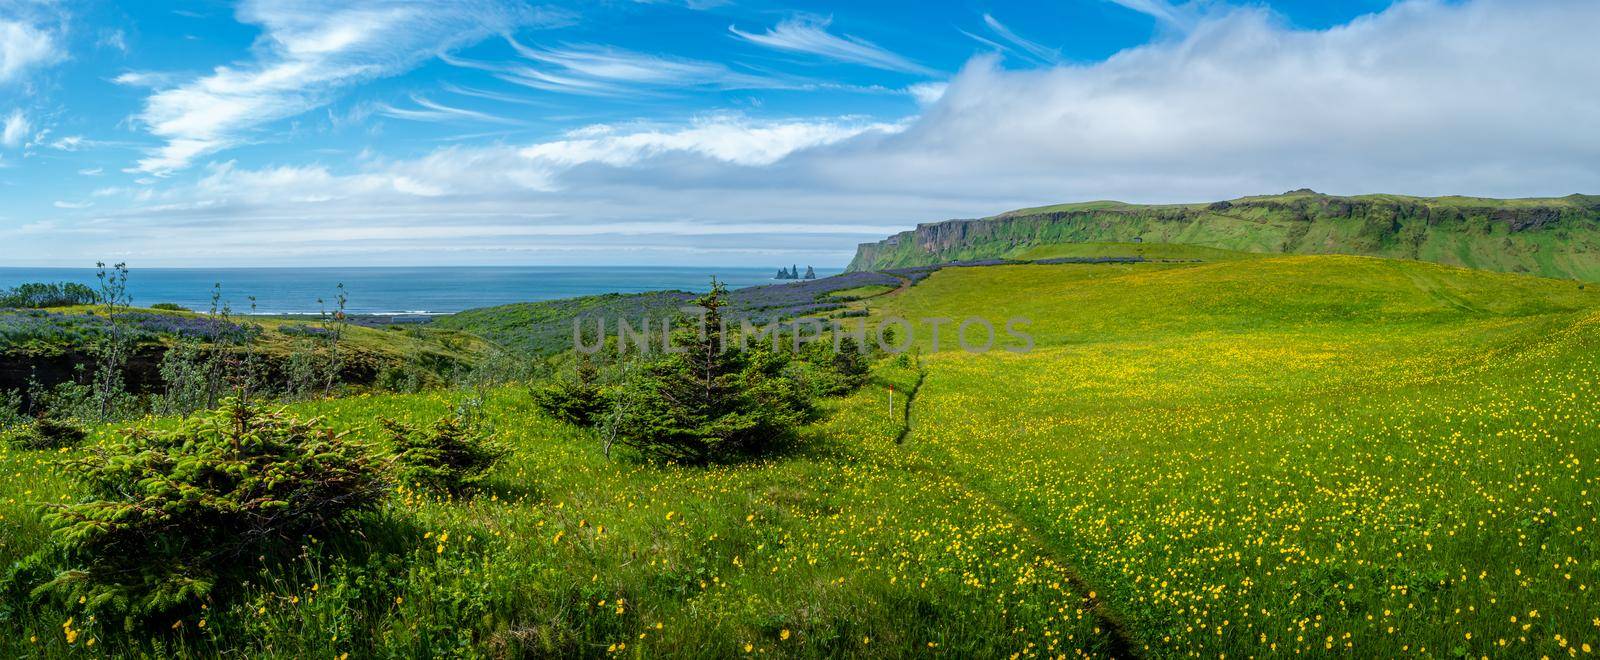 View of basalt stacks Reynisdrangar, black sand beach near Vik and green grass field with yellow margarita flowers, South Iceland, summer time by neurobite